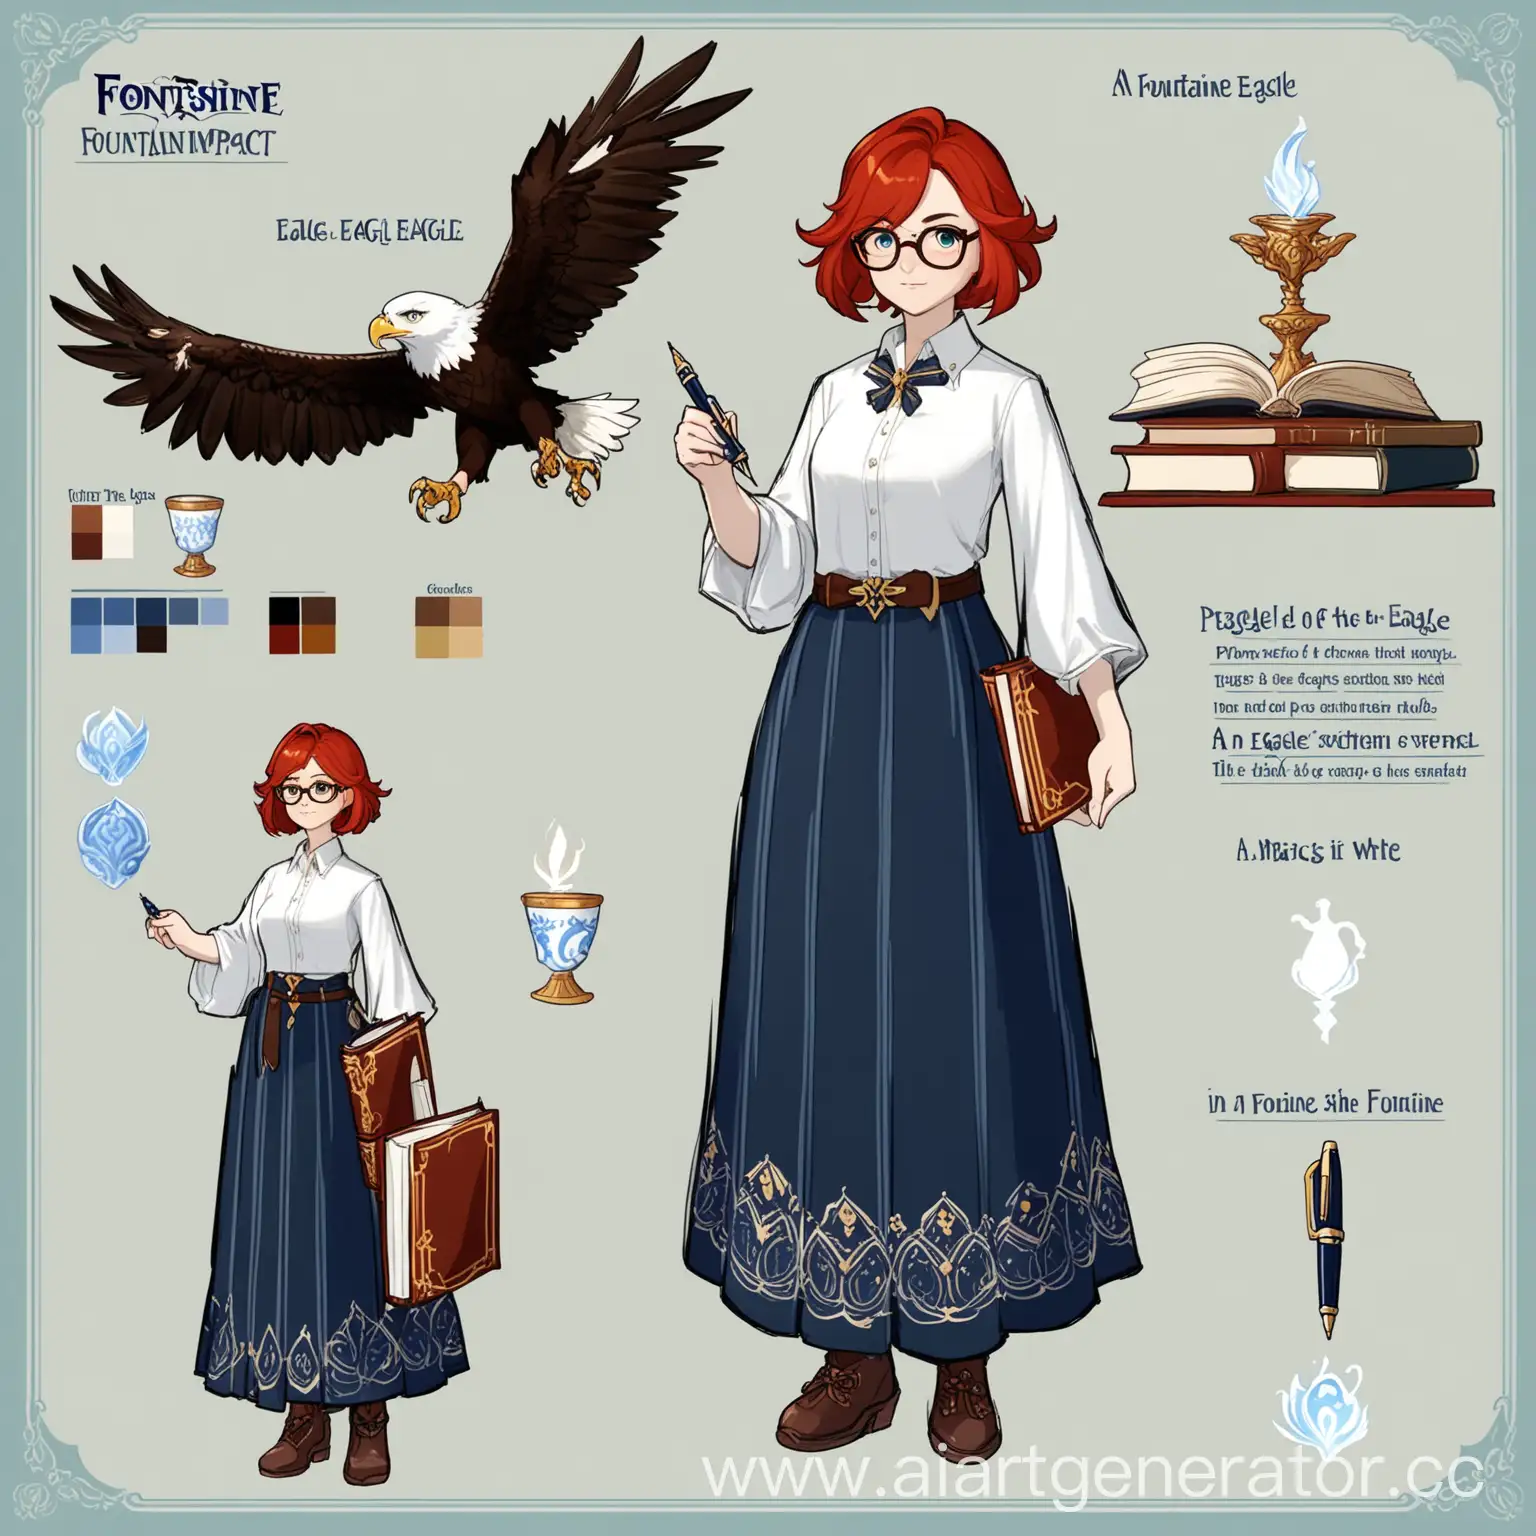 Young-Woman-with-Book-and-Eagle-in-Fantasy-Attire